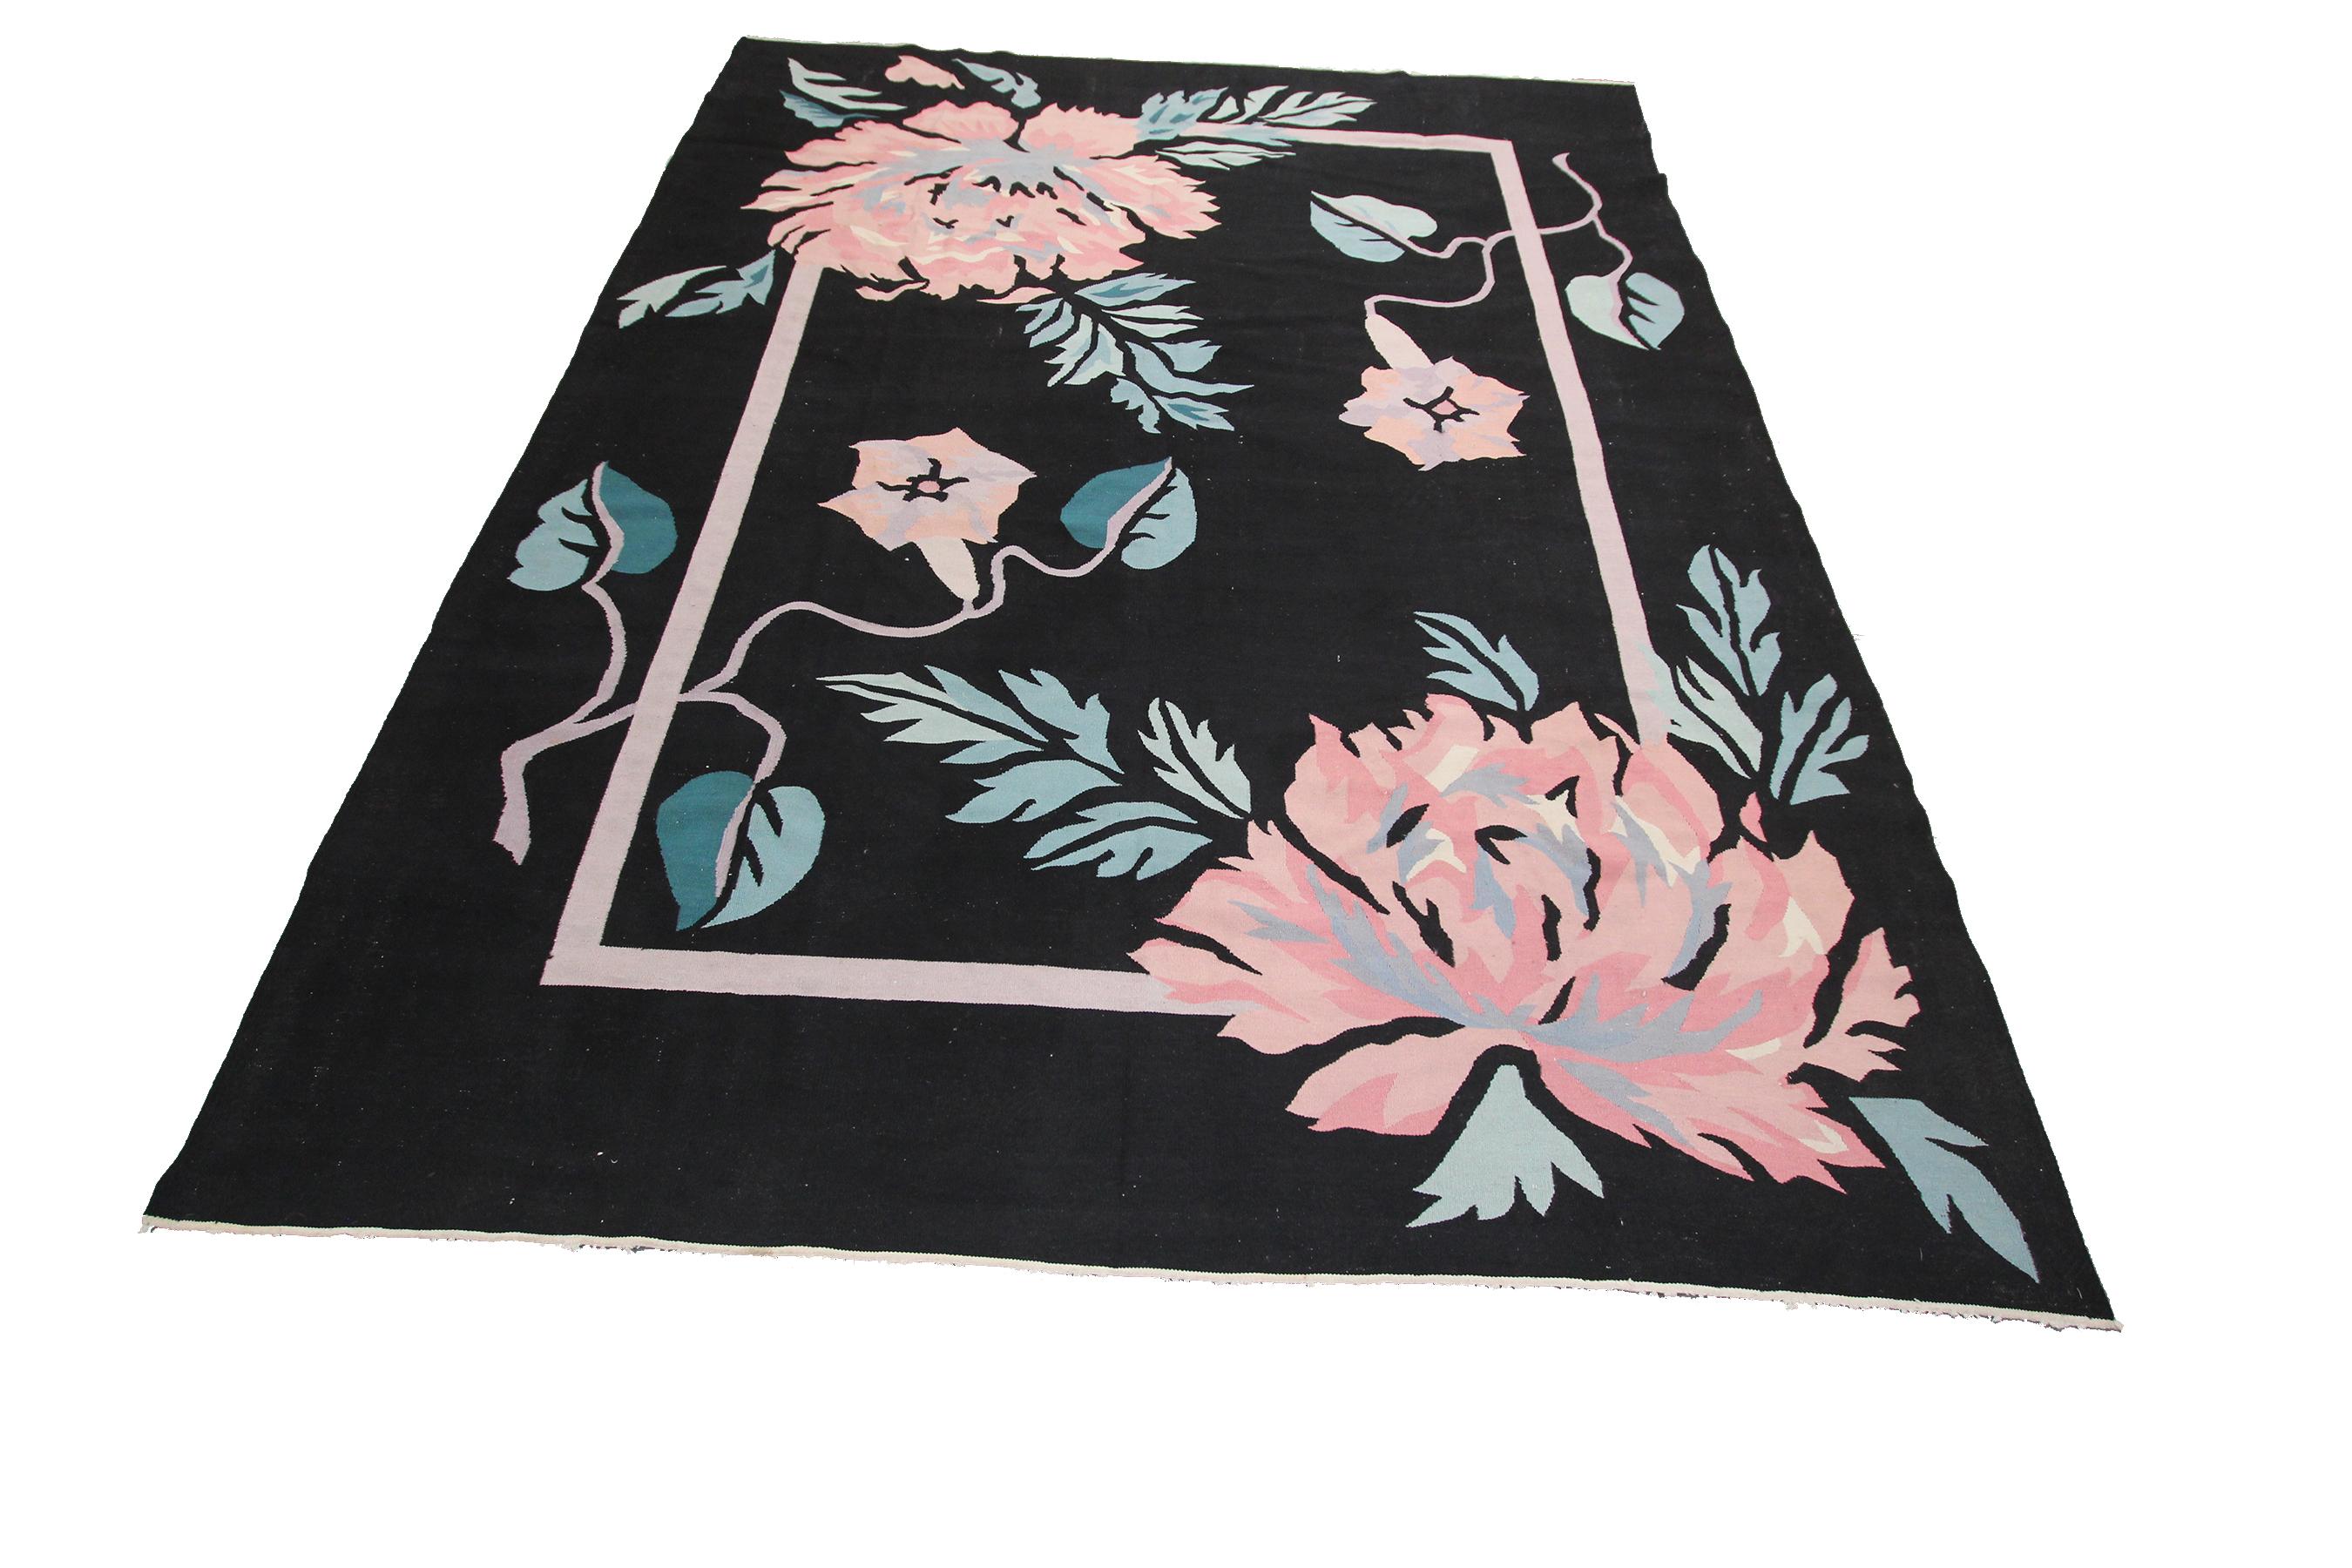 Vintage Art Nouveau Rug Bold Floral Design Black 8x10 Handwoven Art Deco Rug In Good Condition For Sale In New York, NY